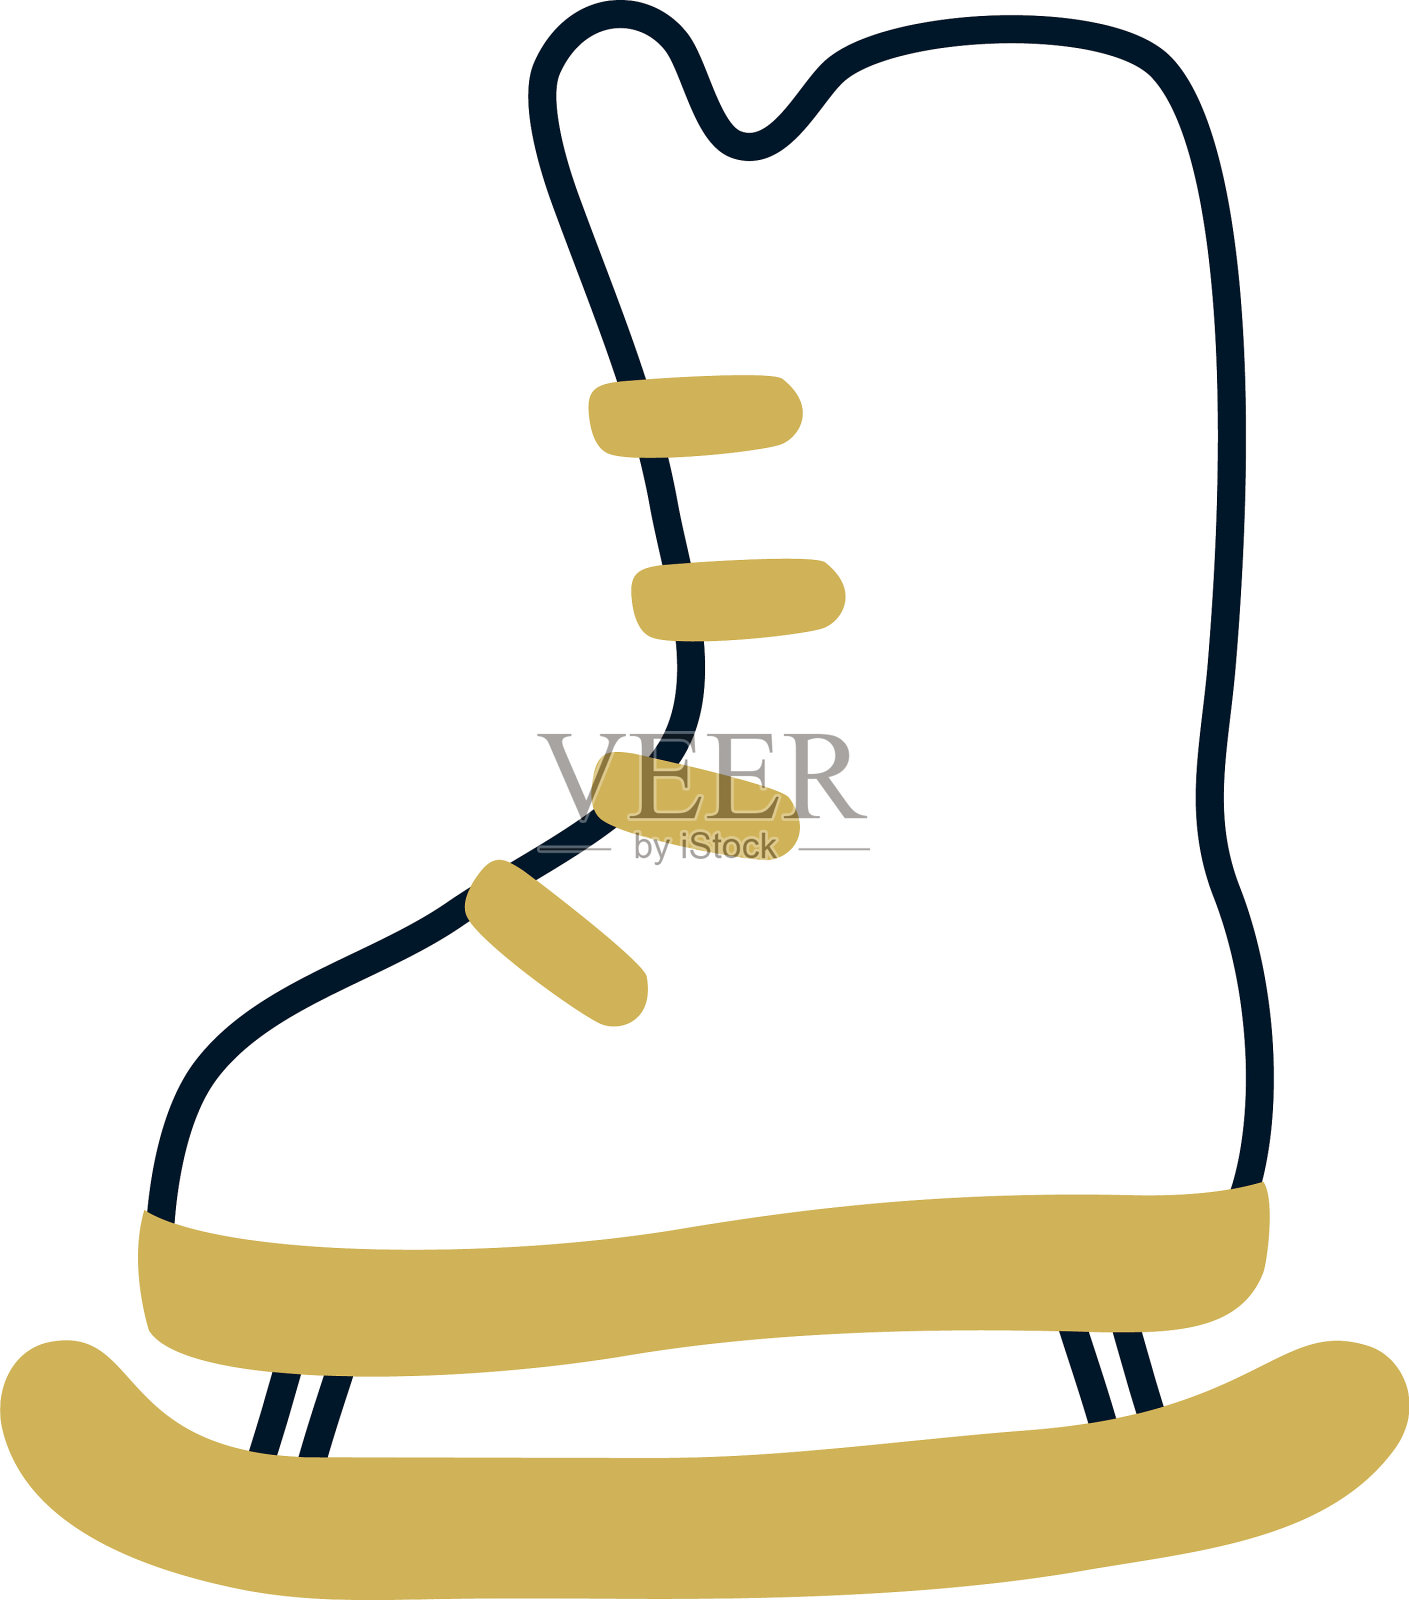 Download Ice Skates PNG Image for Free